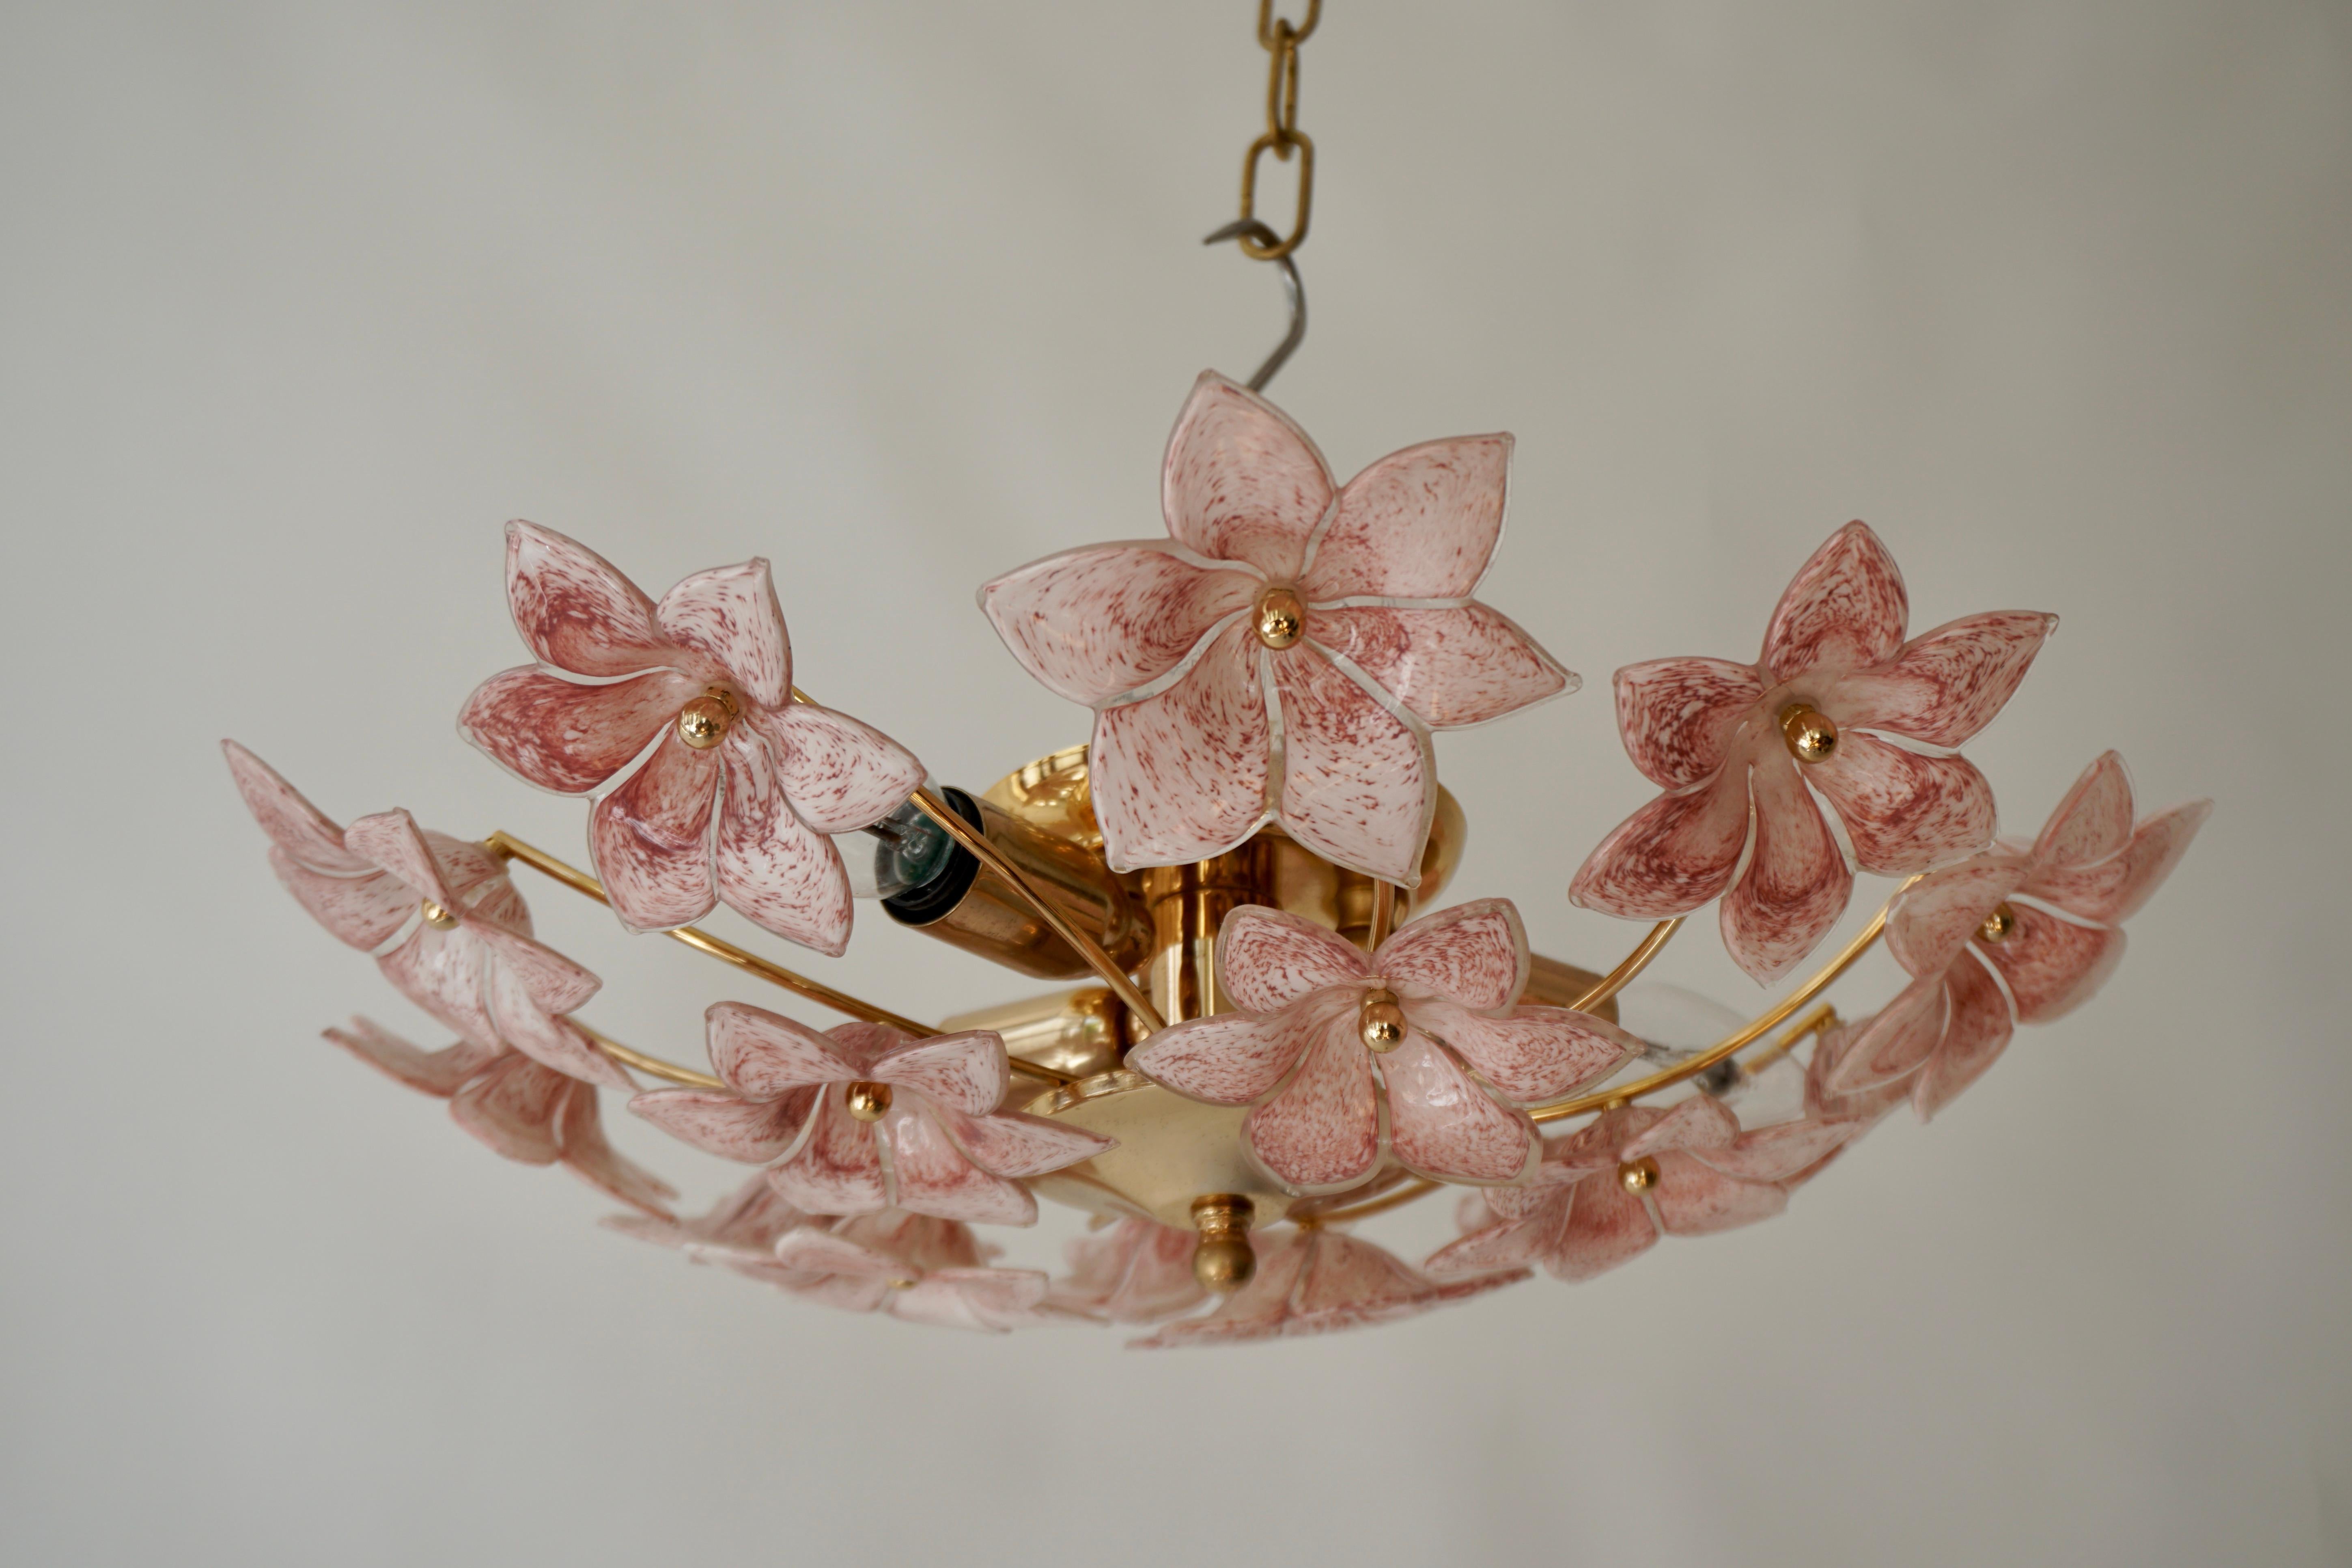 Two lovely pink Murano glass flowers flush mount or sconces, Italy, 1970s. 

Brass ceiling basket with hand-blown pink Murano glass flowers.This flush mount can also be used as a wall lamp.
It takes three E14 screw light bulbs. 

Measures: Diameter